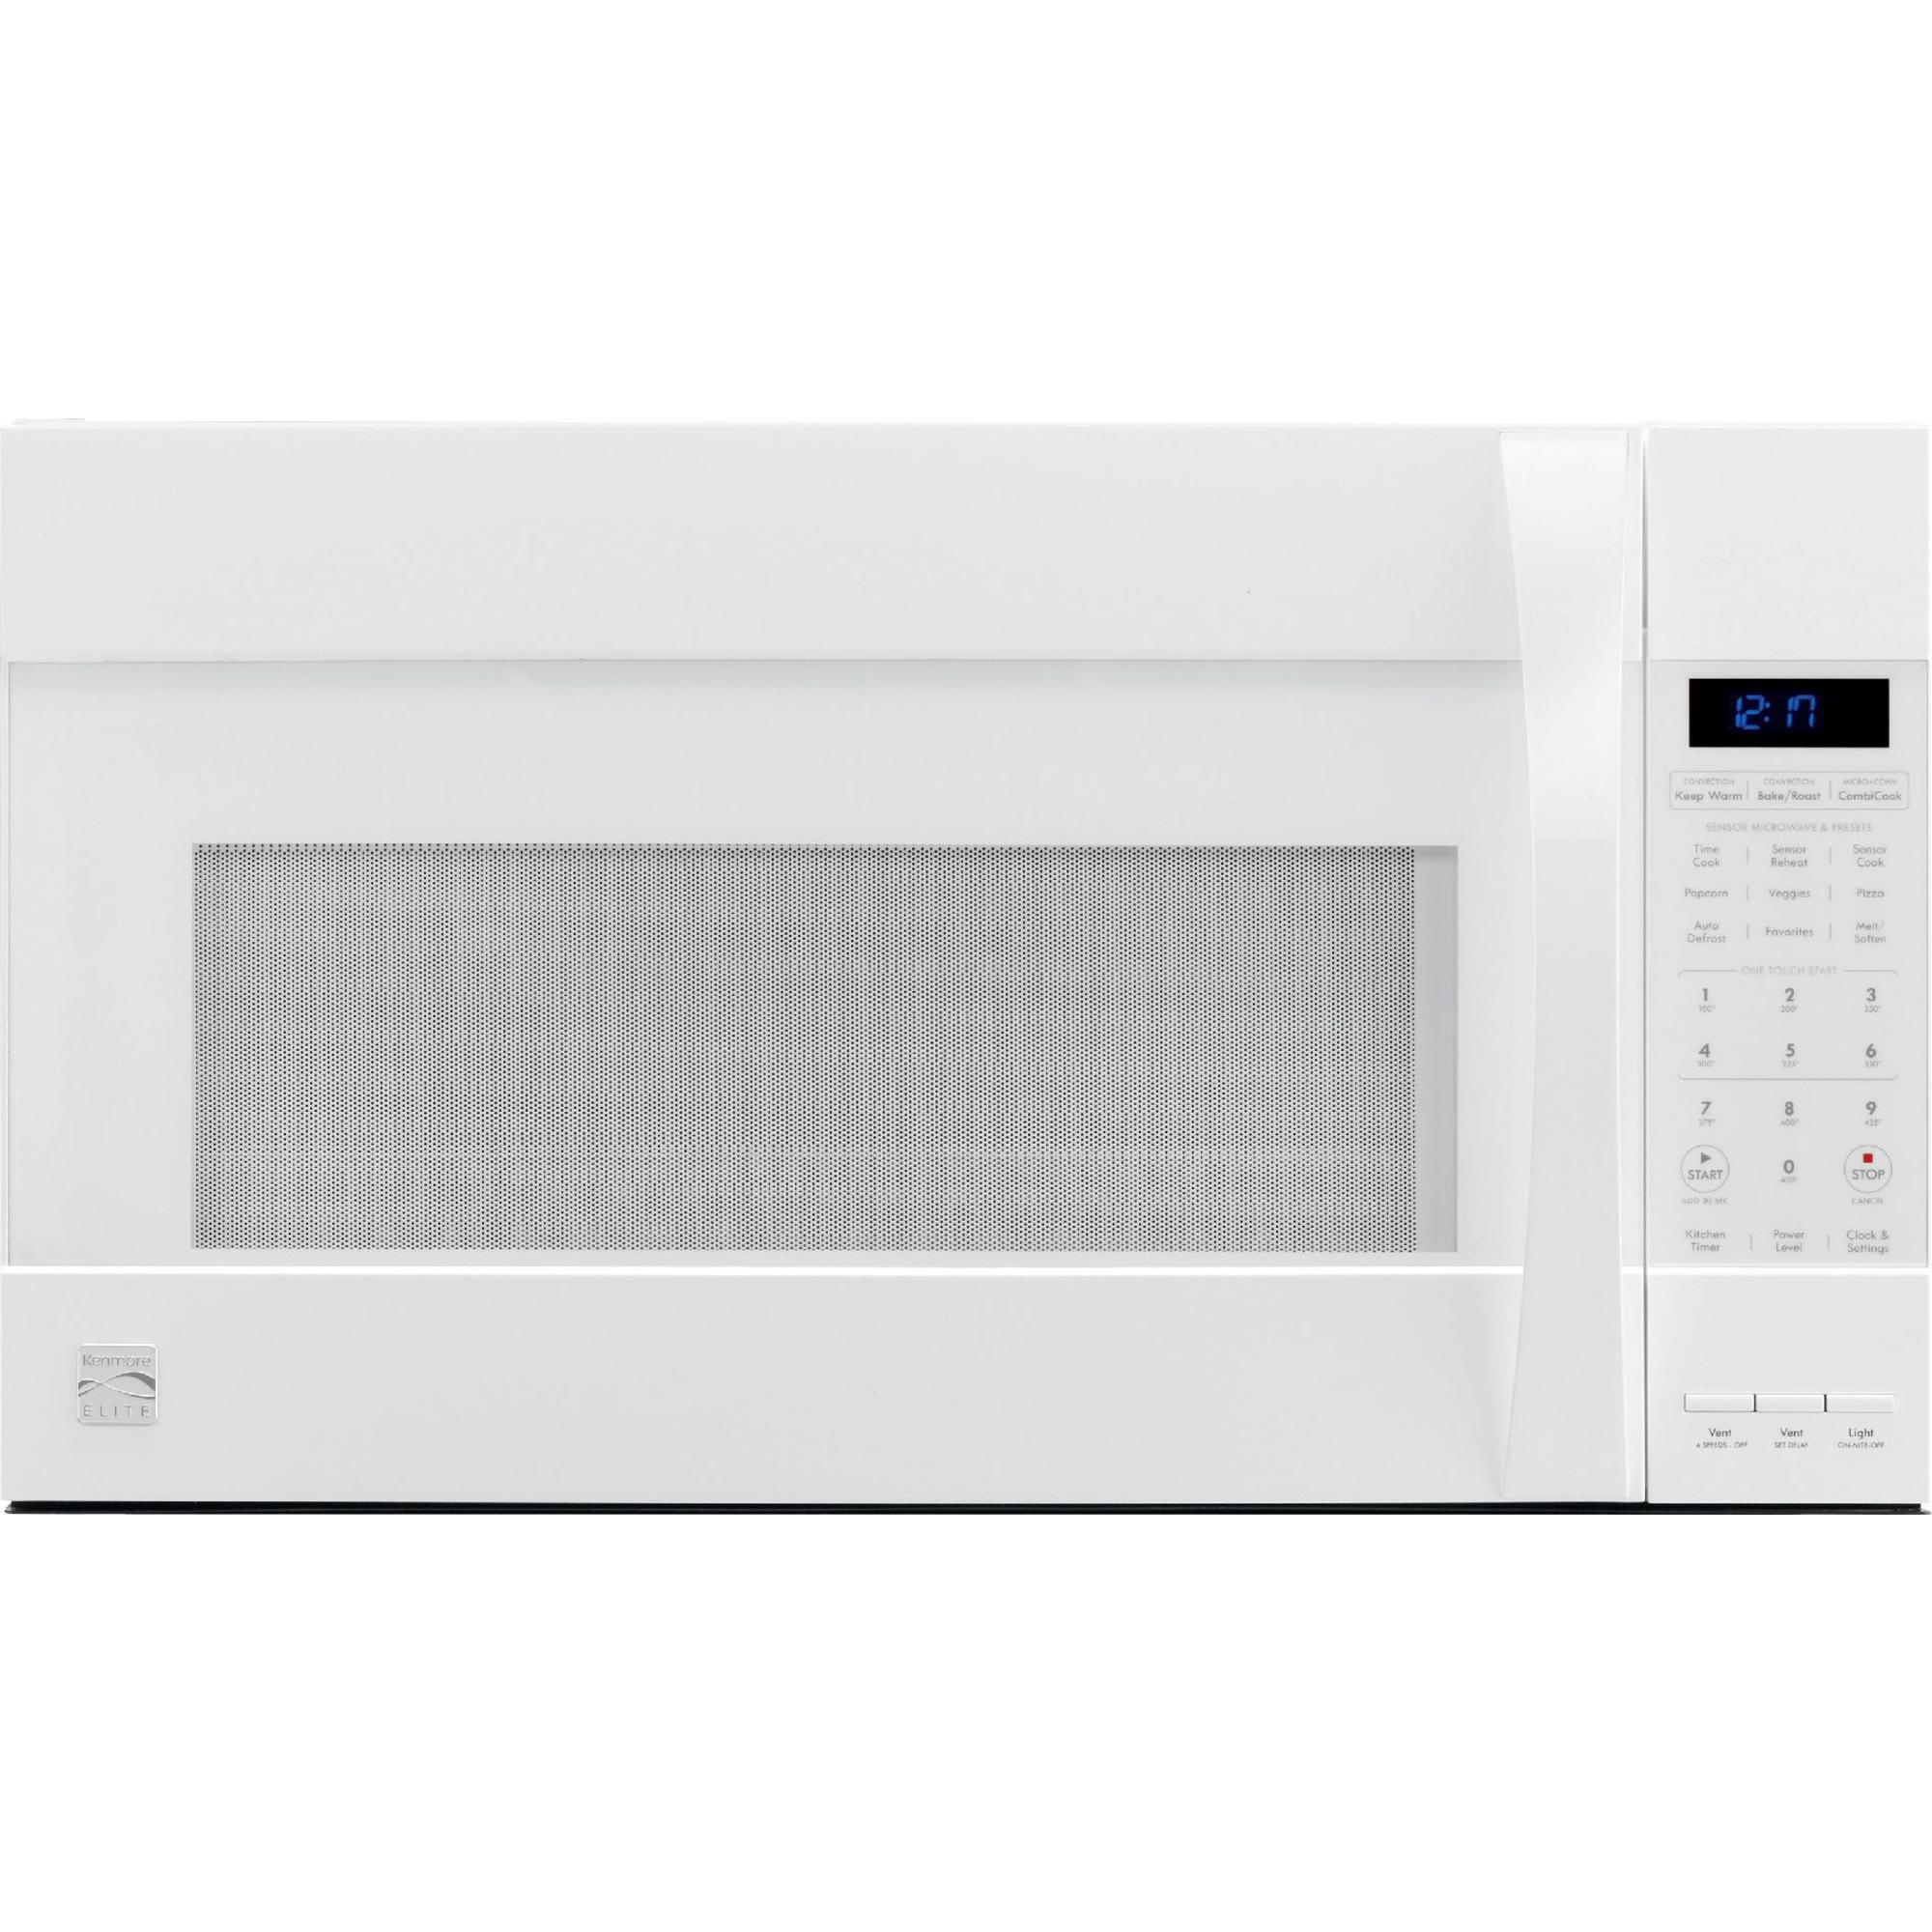 Kenmore Elite Microwave Convection Oven User Manual